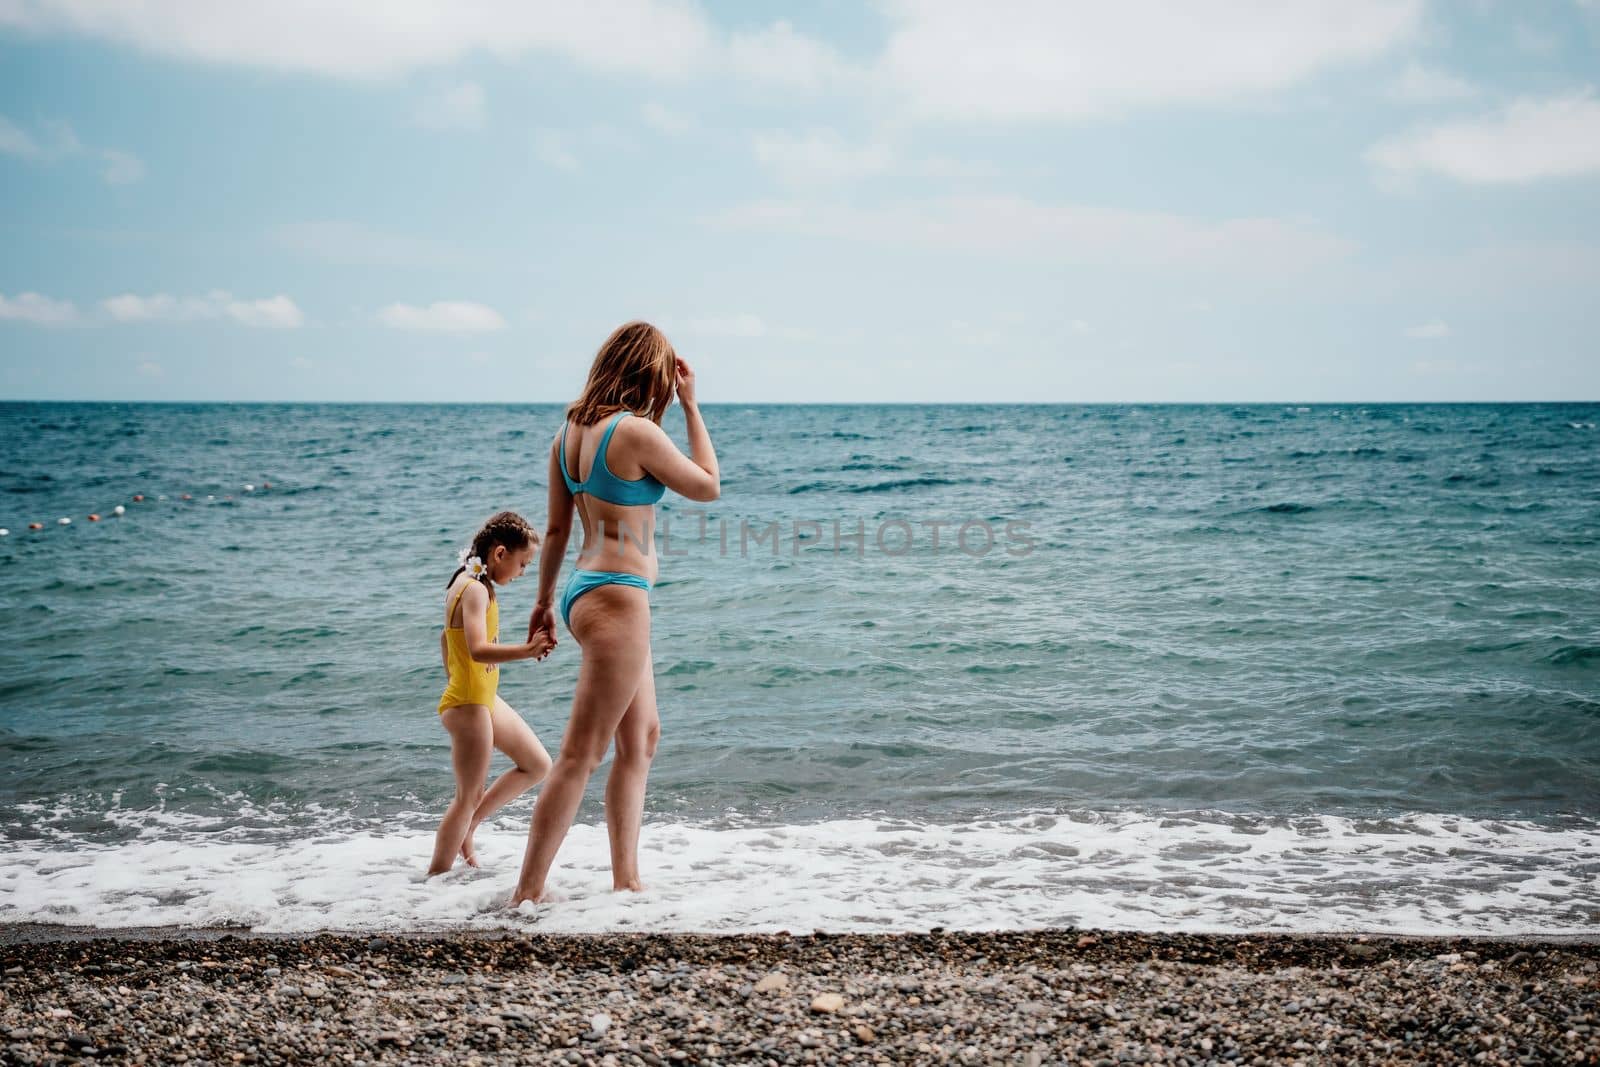 Mother and daughter having fun on tropical beach - Mum playing with her kid in holiday vacation next to the ocean - Family lifestyle and love concept